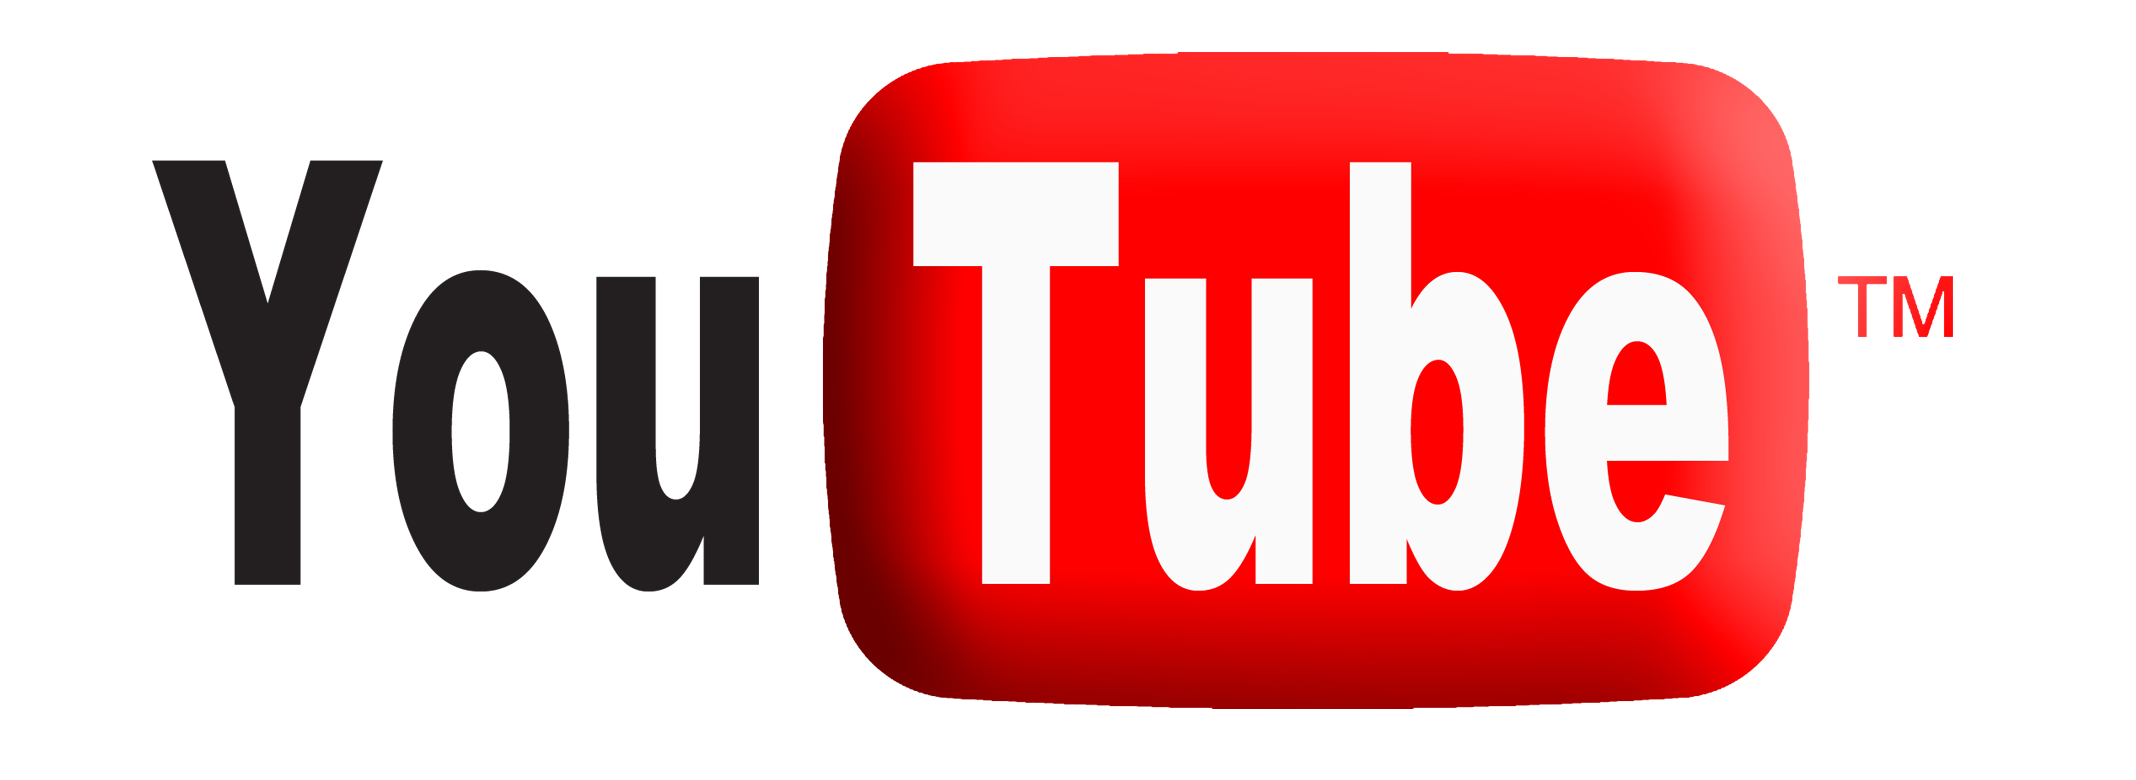 Free download logo. Youtube images png